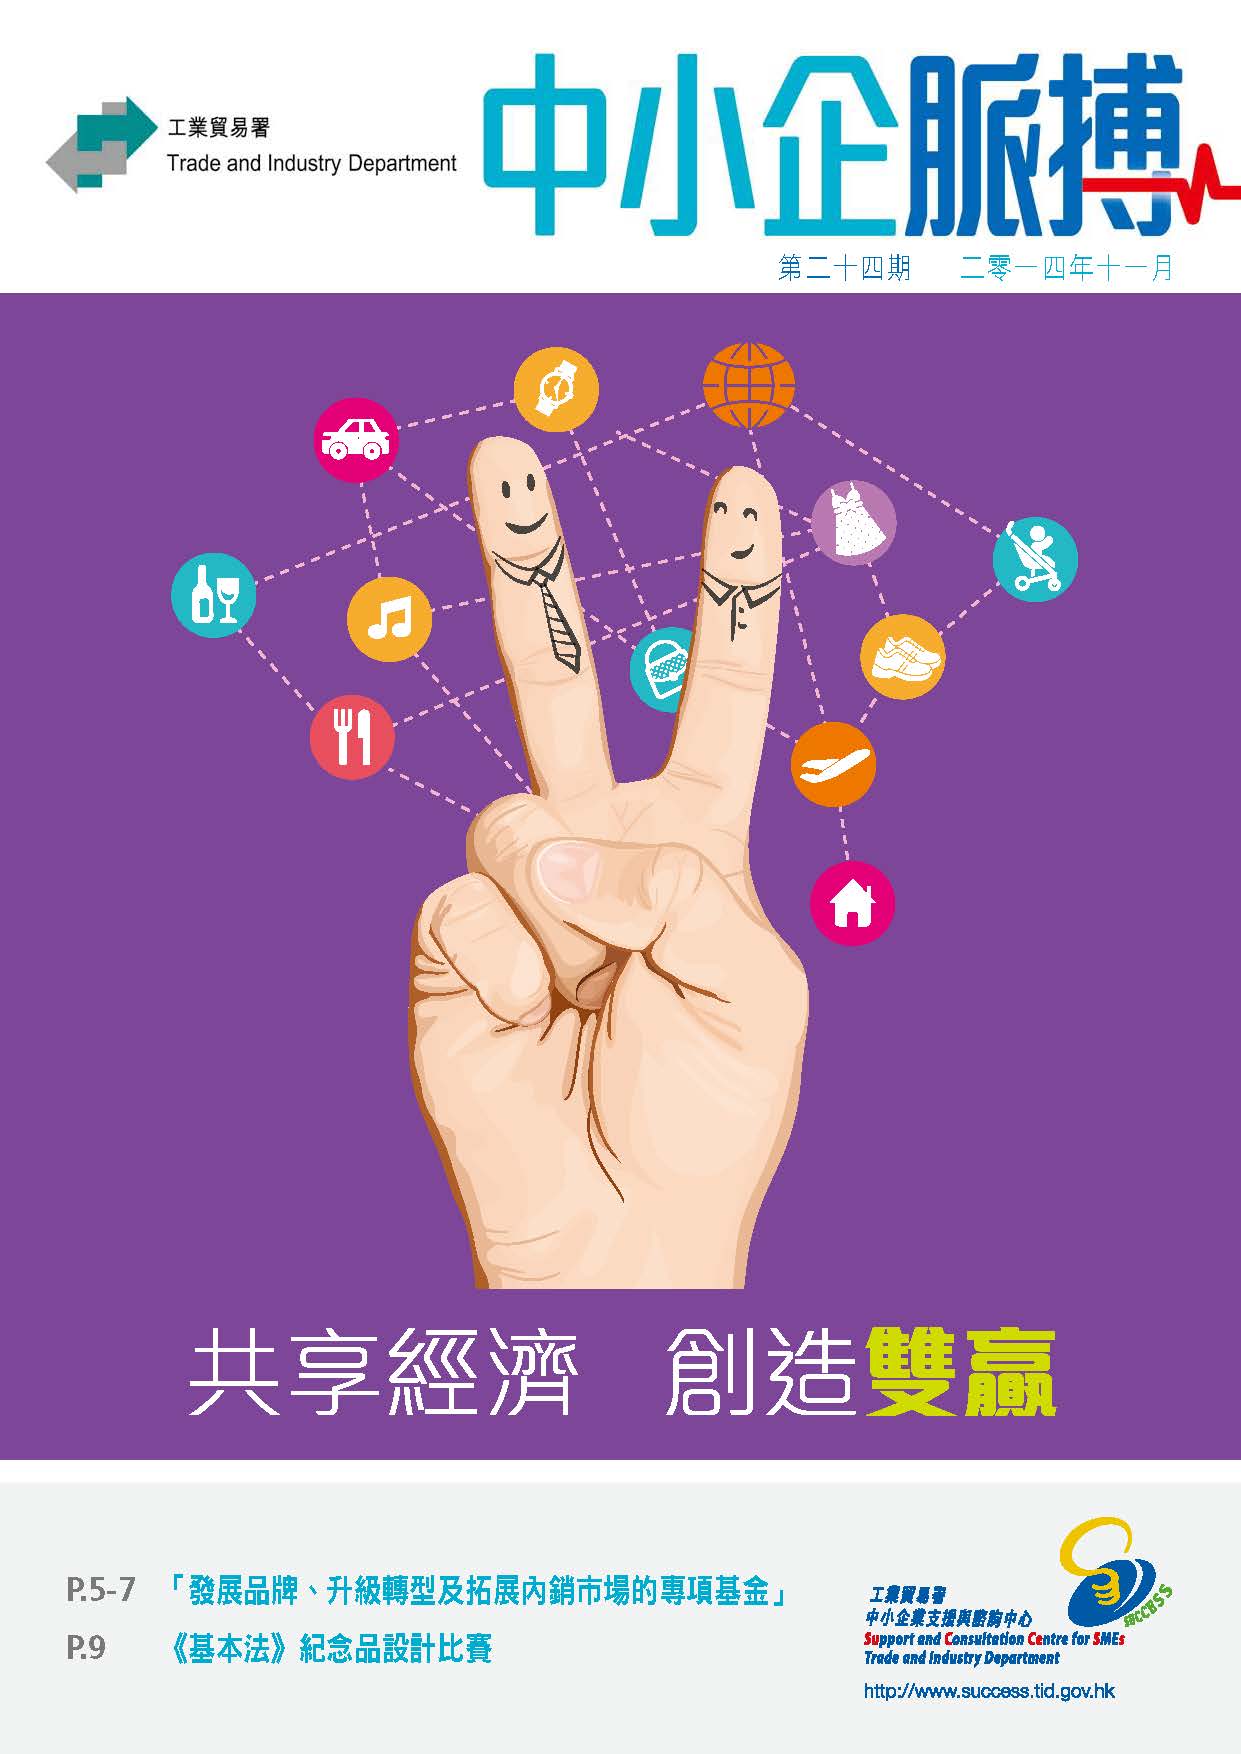 Twenty-Fourth Issue (November 2014) (Only available in Chinese)